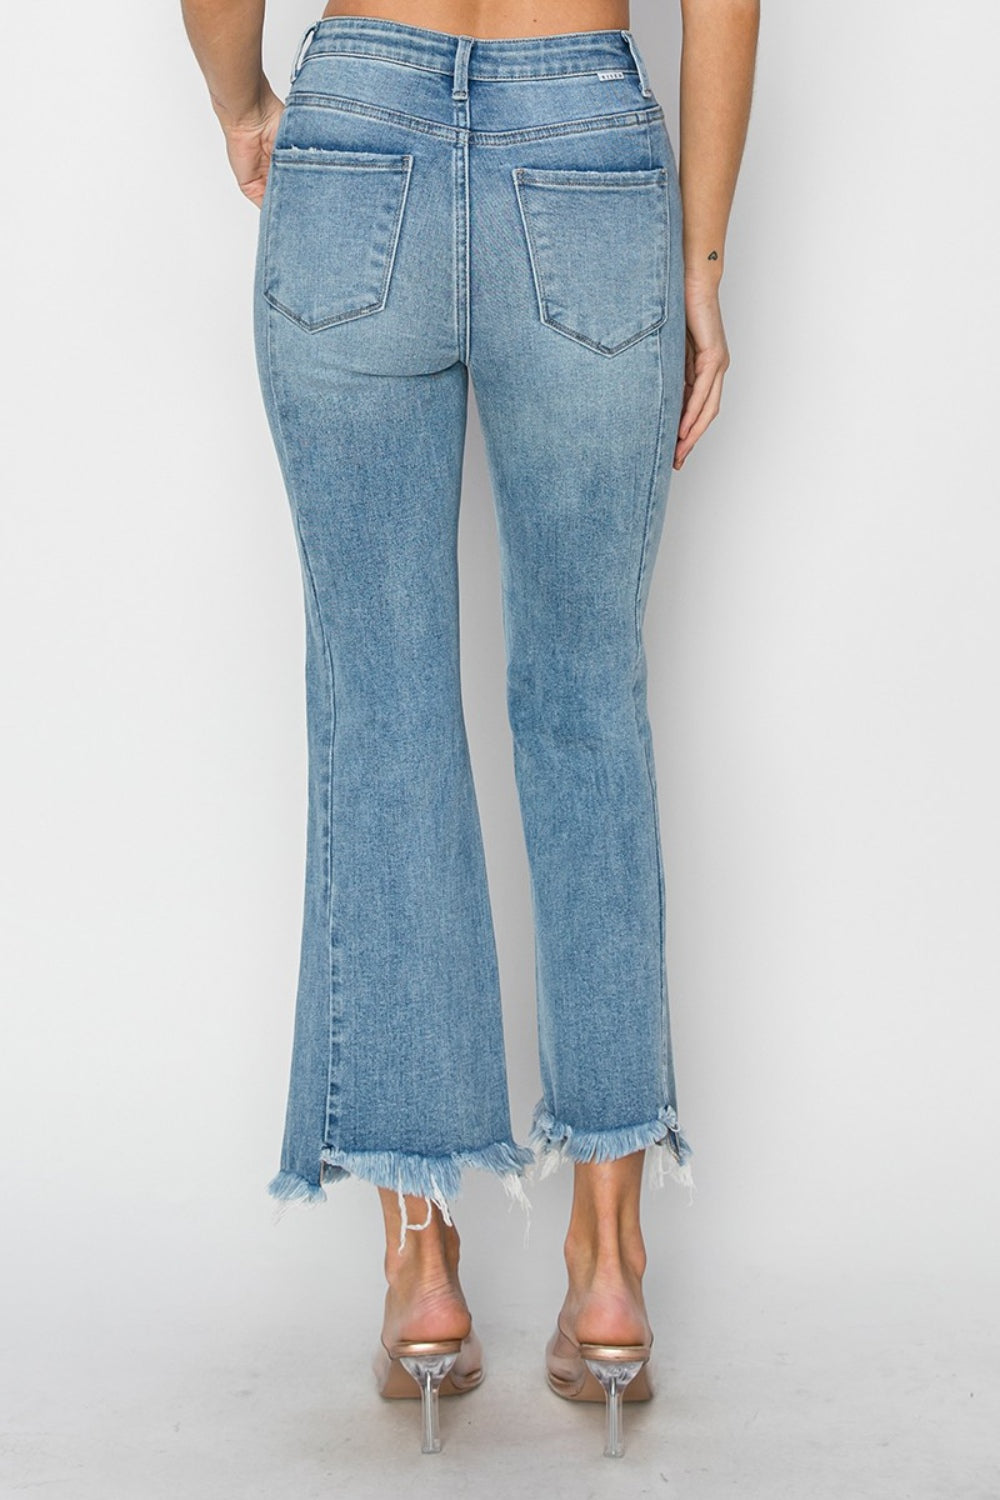 RISEN - Light Wash Ankle Flare Jeans - Inspired Eye Boutique